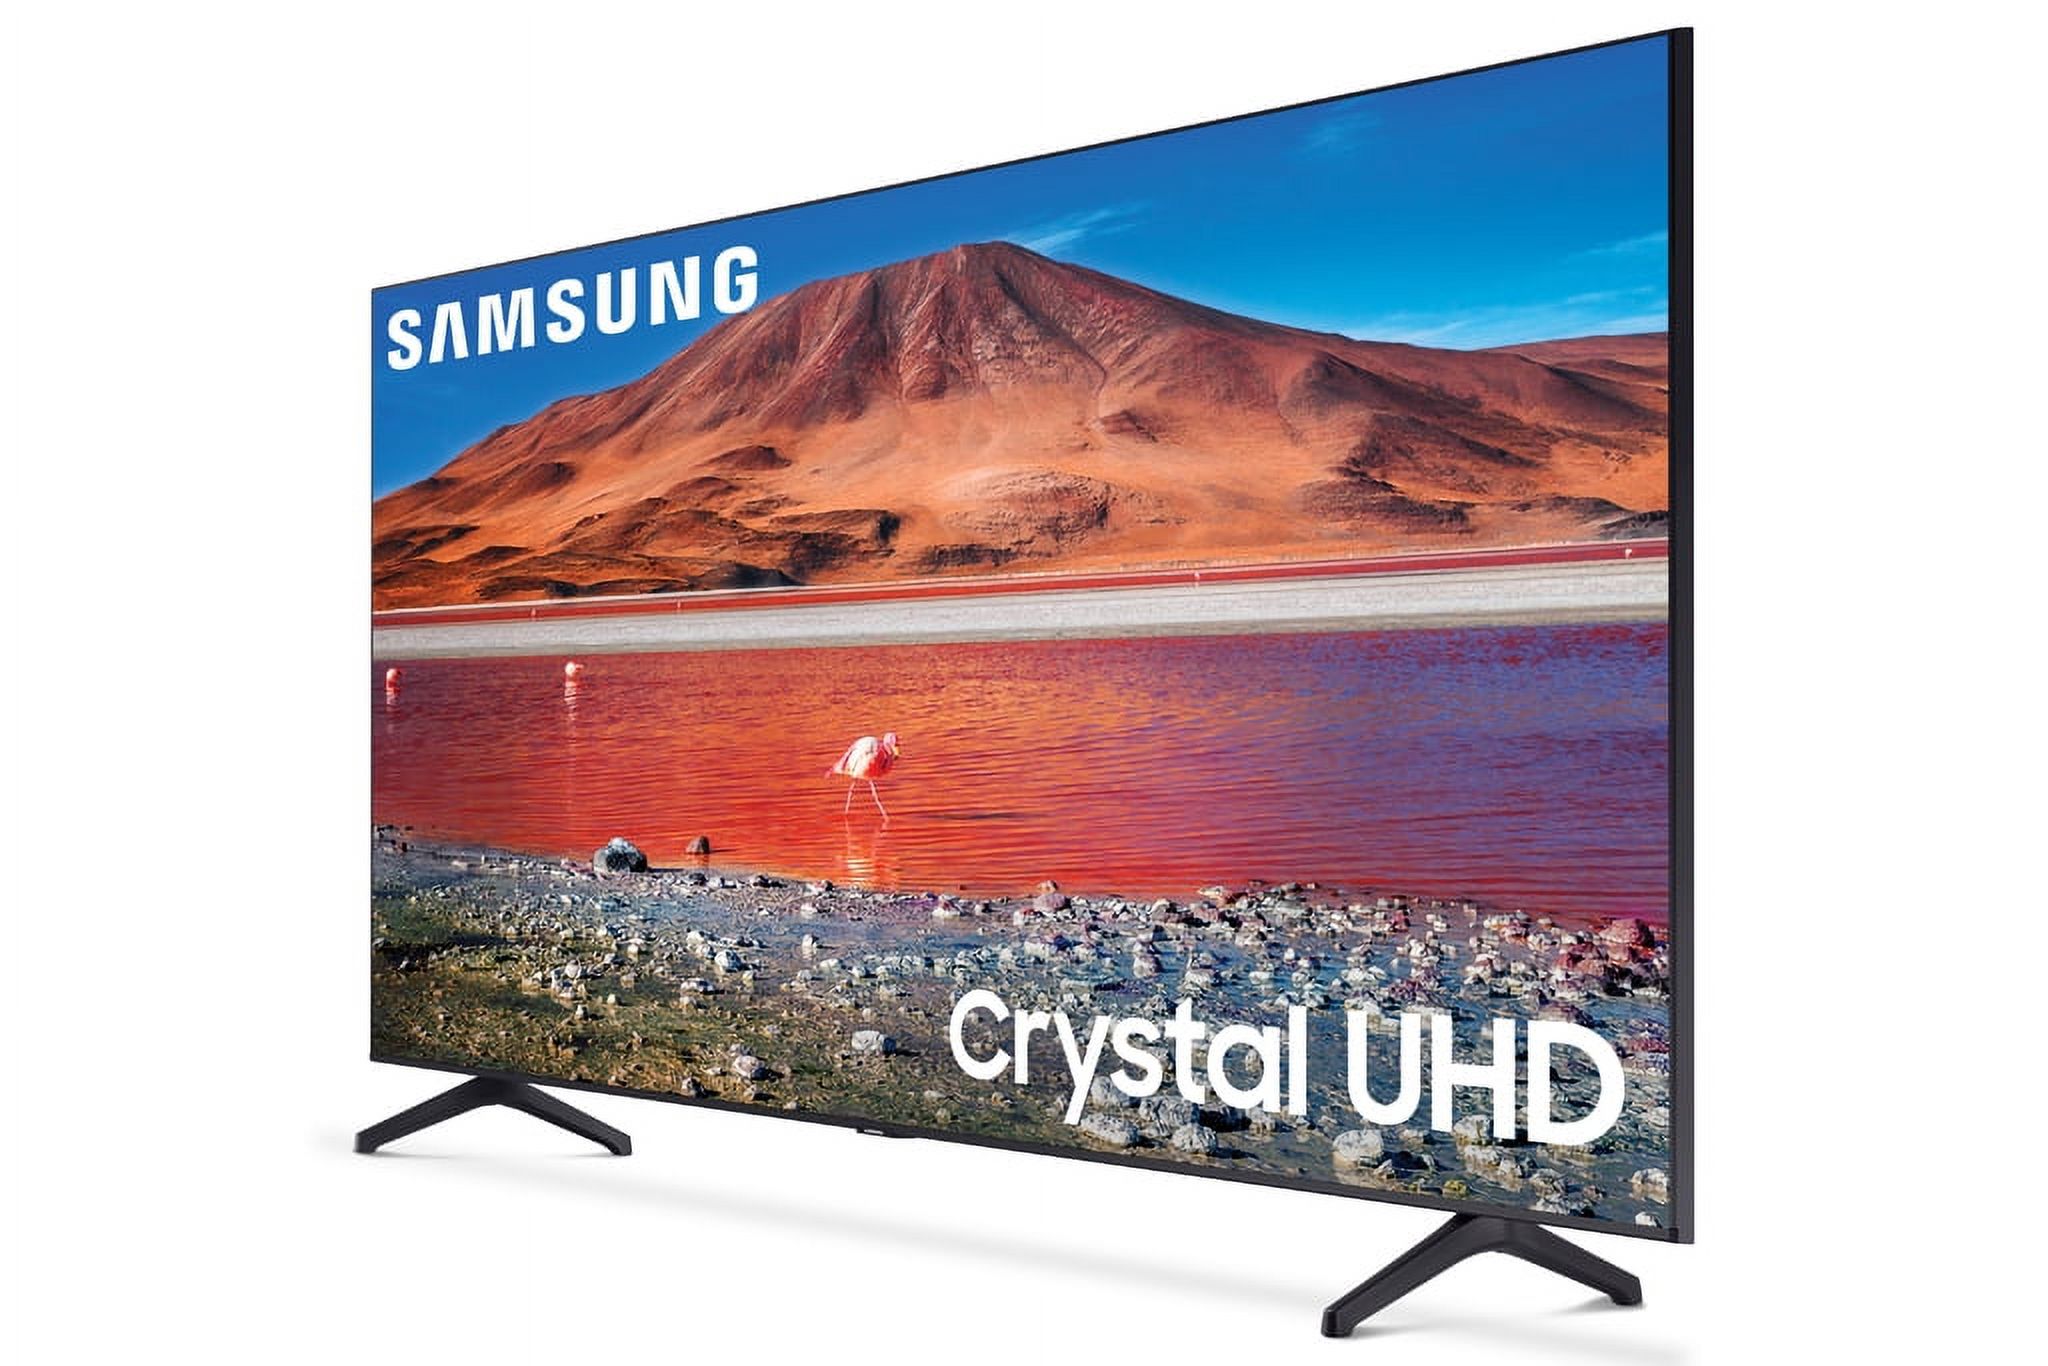 SAMSUNG 70" Class 4K Crystal UHD (2160P) LED Smart TV with HDR UN70TU7000BXZA - image 12 of 16